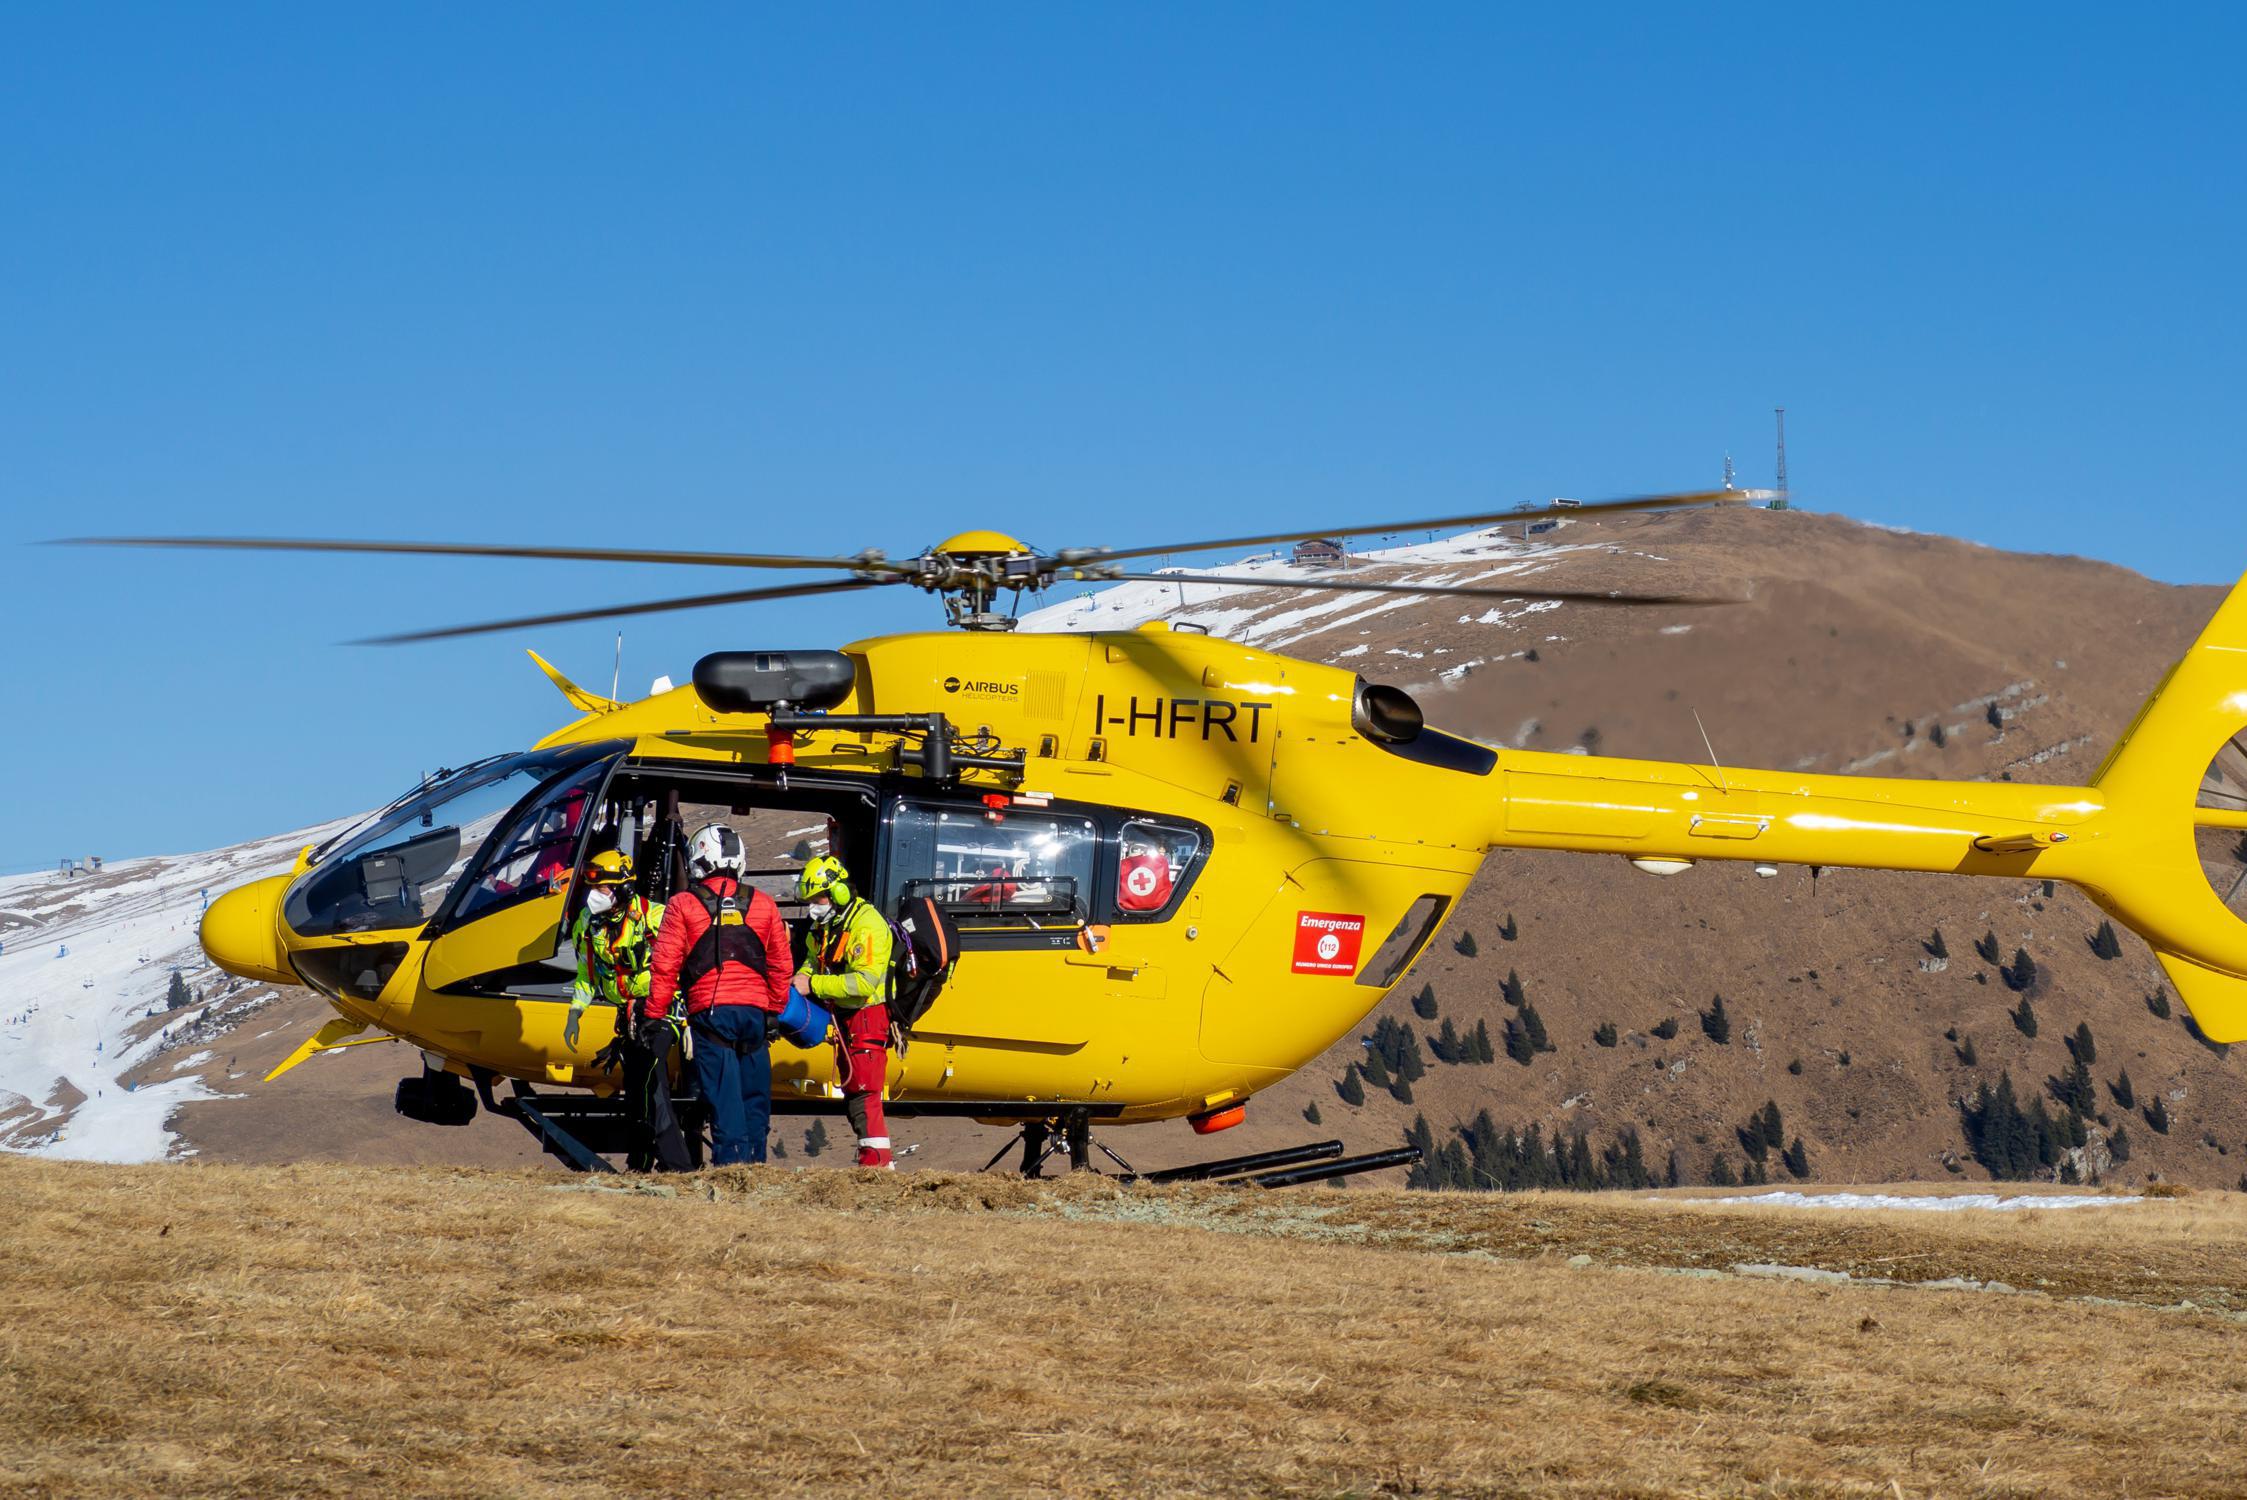 Helicopter accident on the Monte Rosa mountain range in Italy